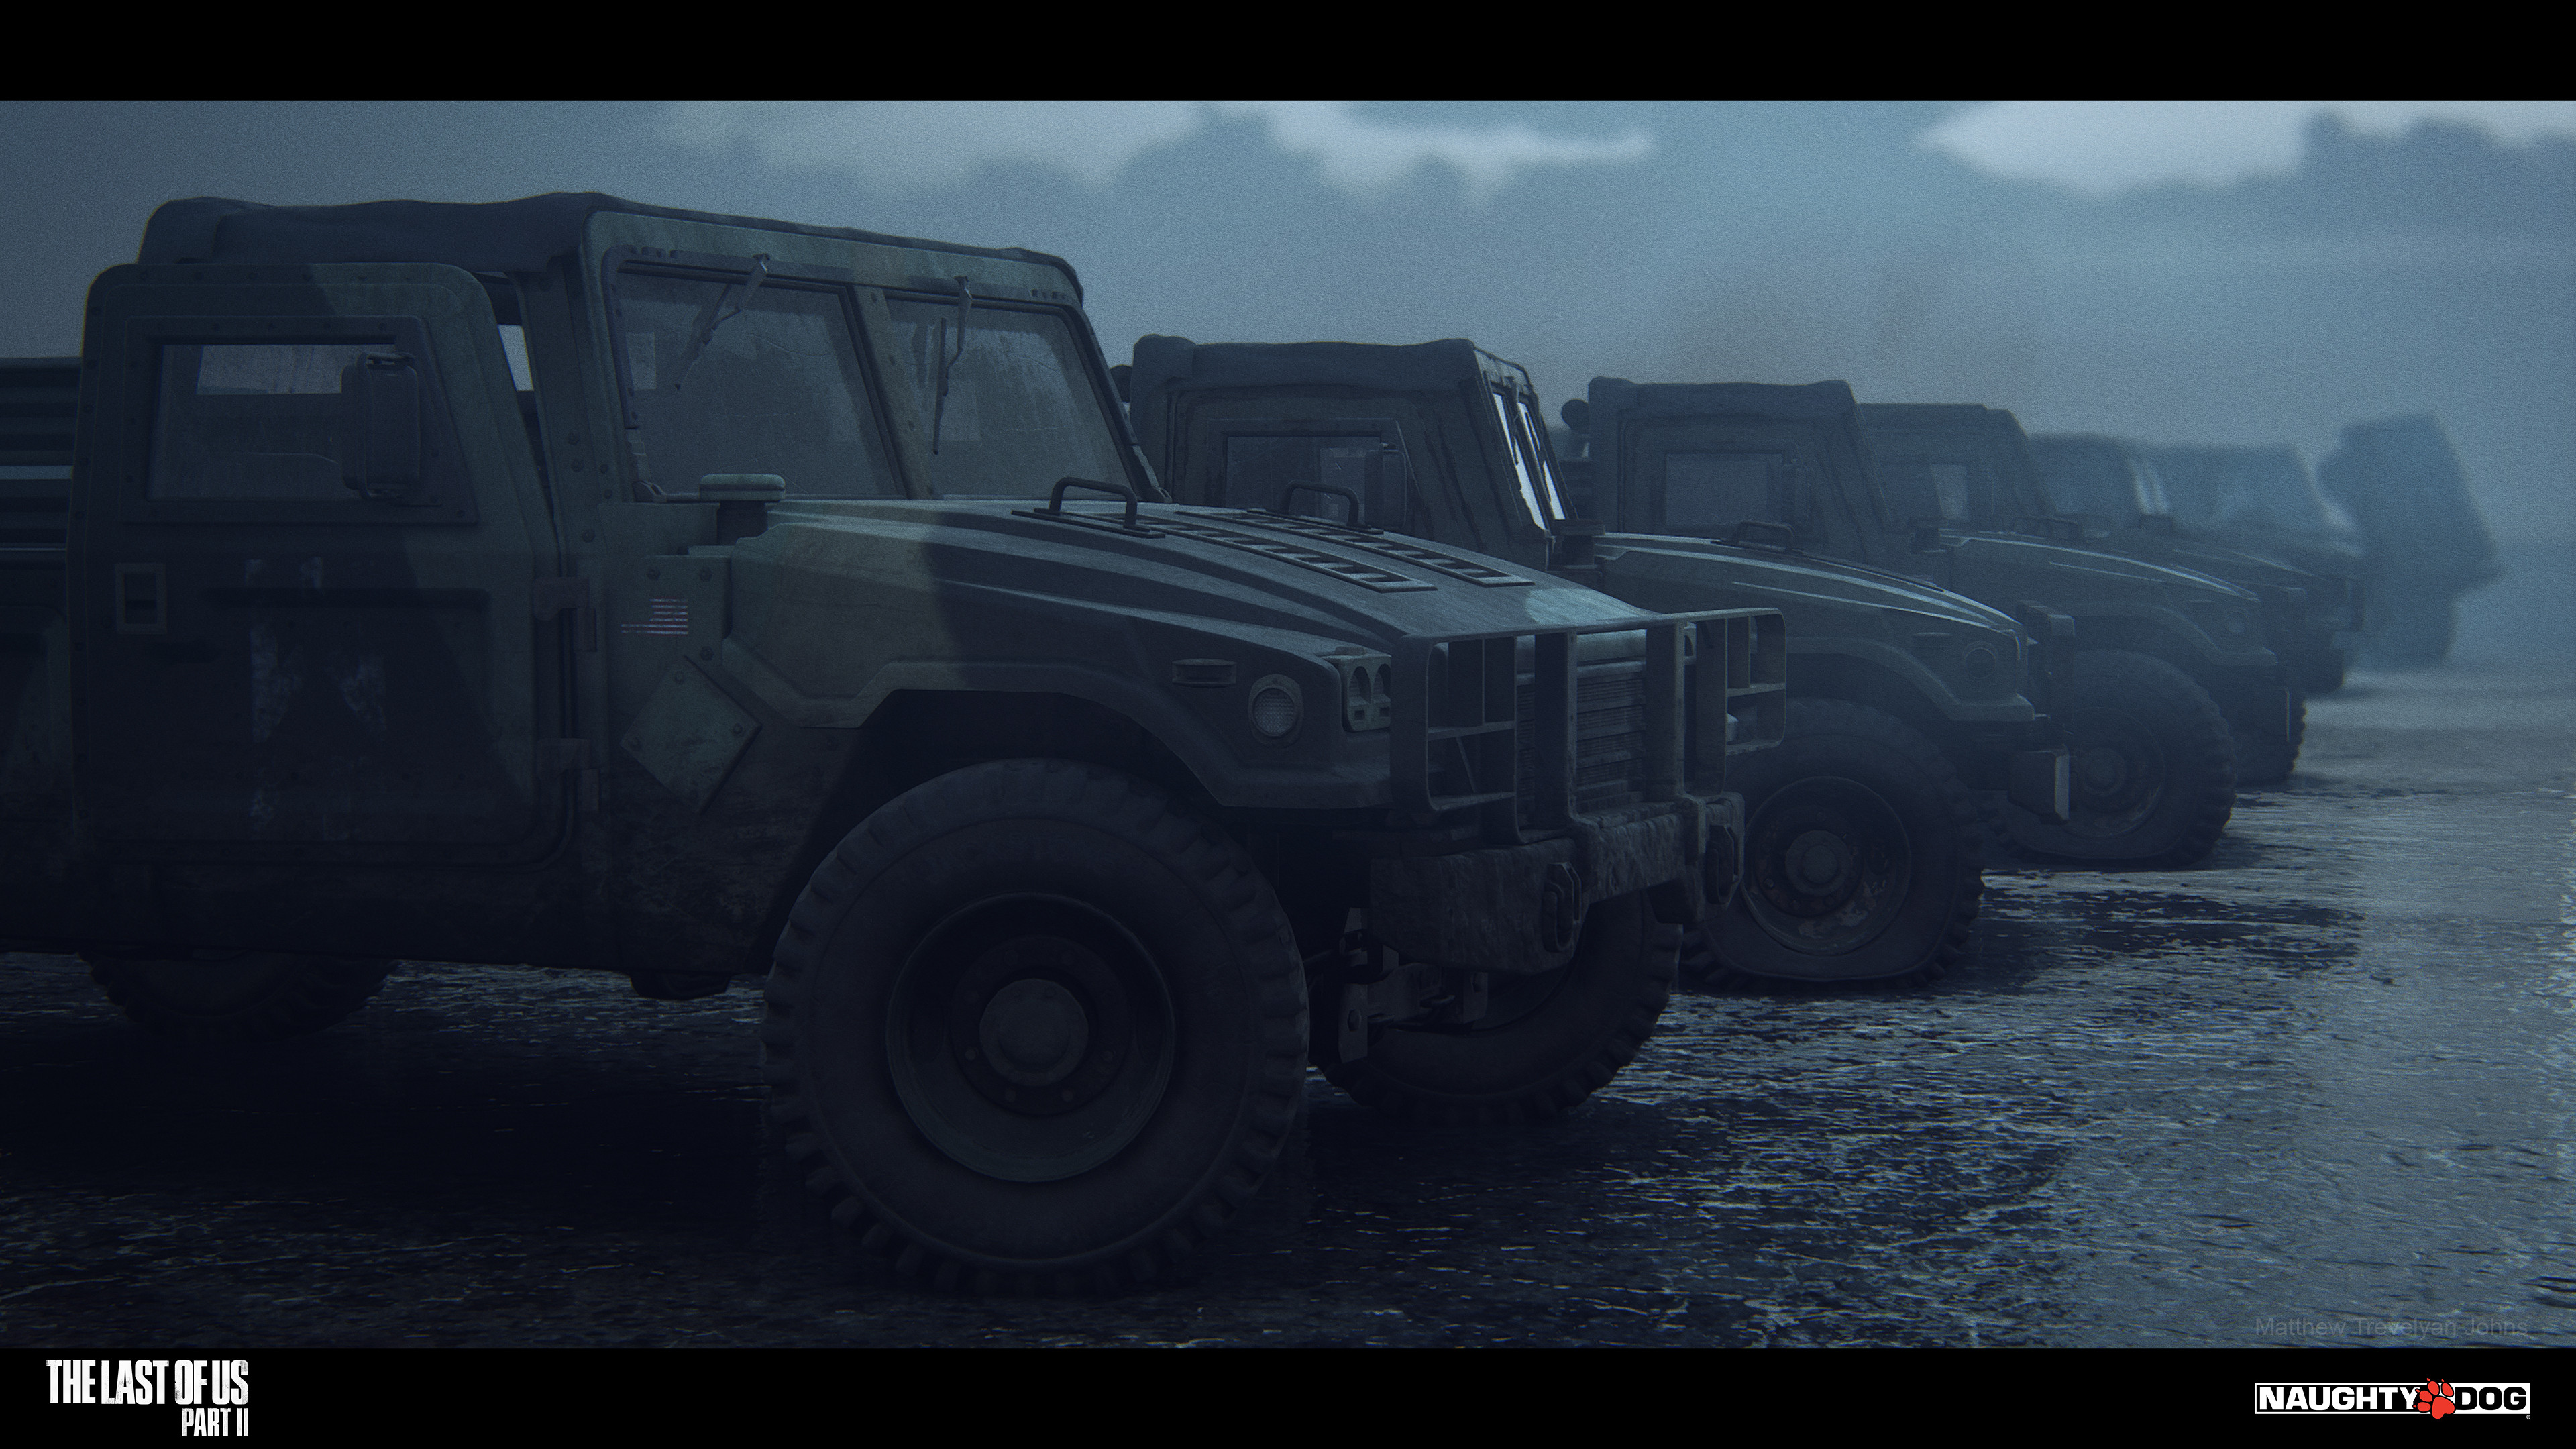 Test scenes like this allow me to prototype shaders and examine my assets up close, without the distraction of other environment elements. I love this wet, overcast fog setting and the camo paint material variation seen here for the WLF vehicles